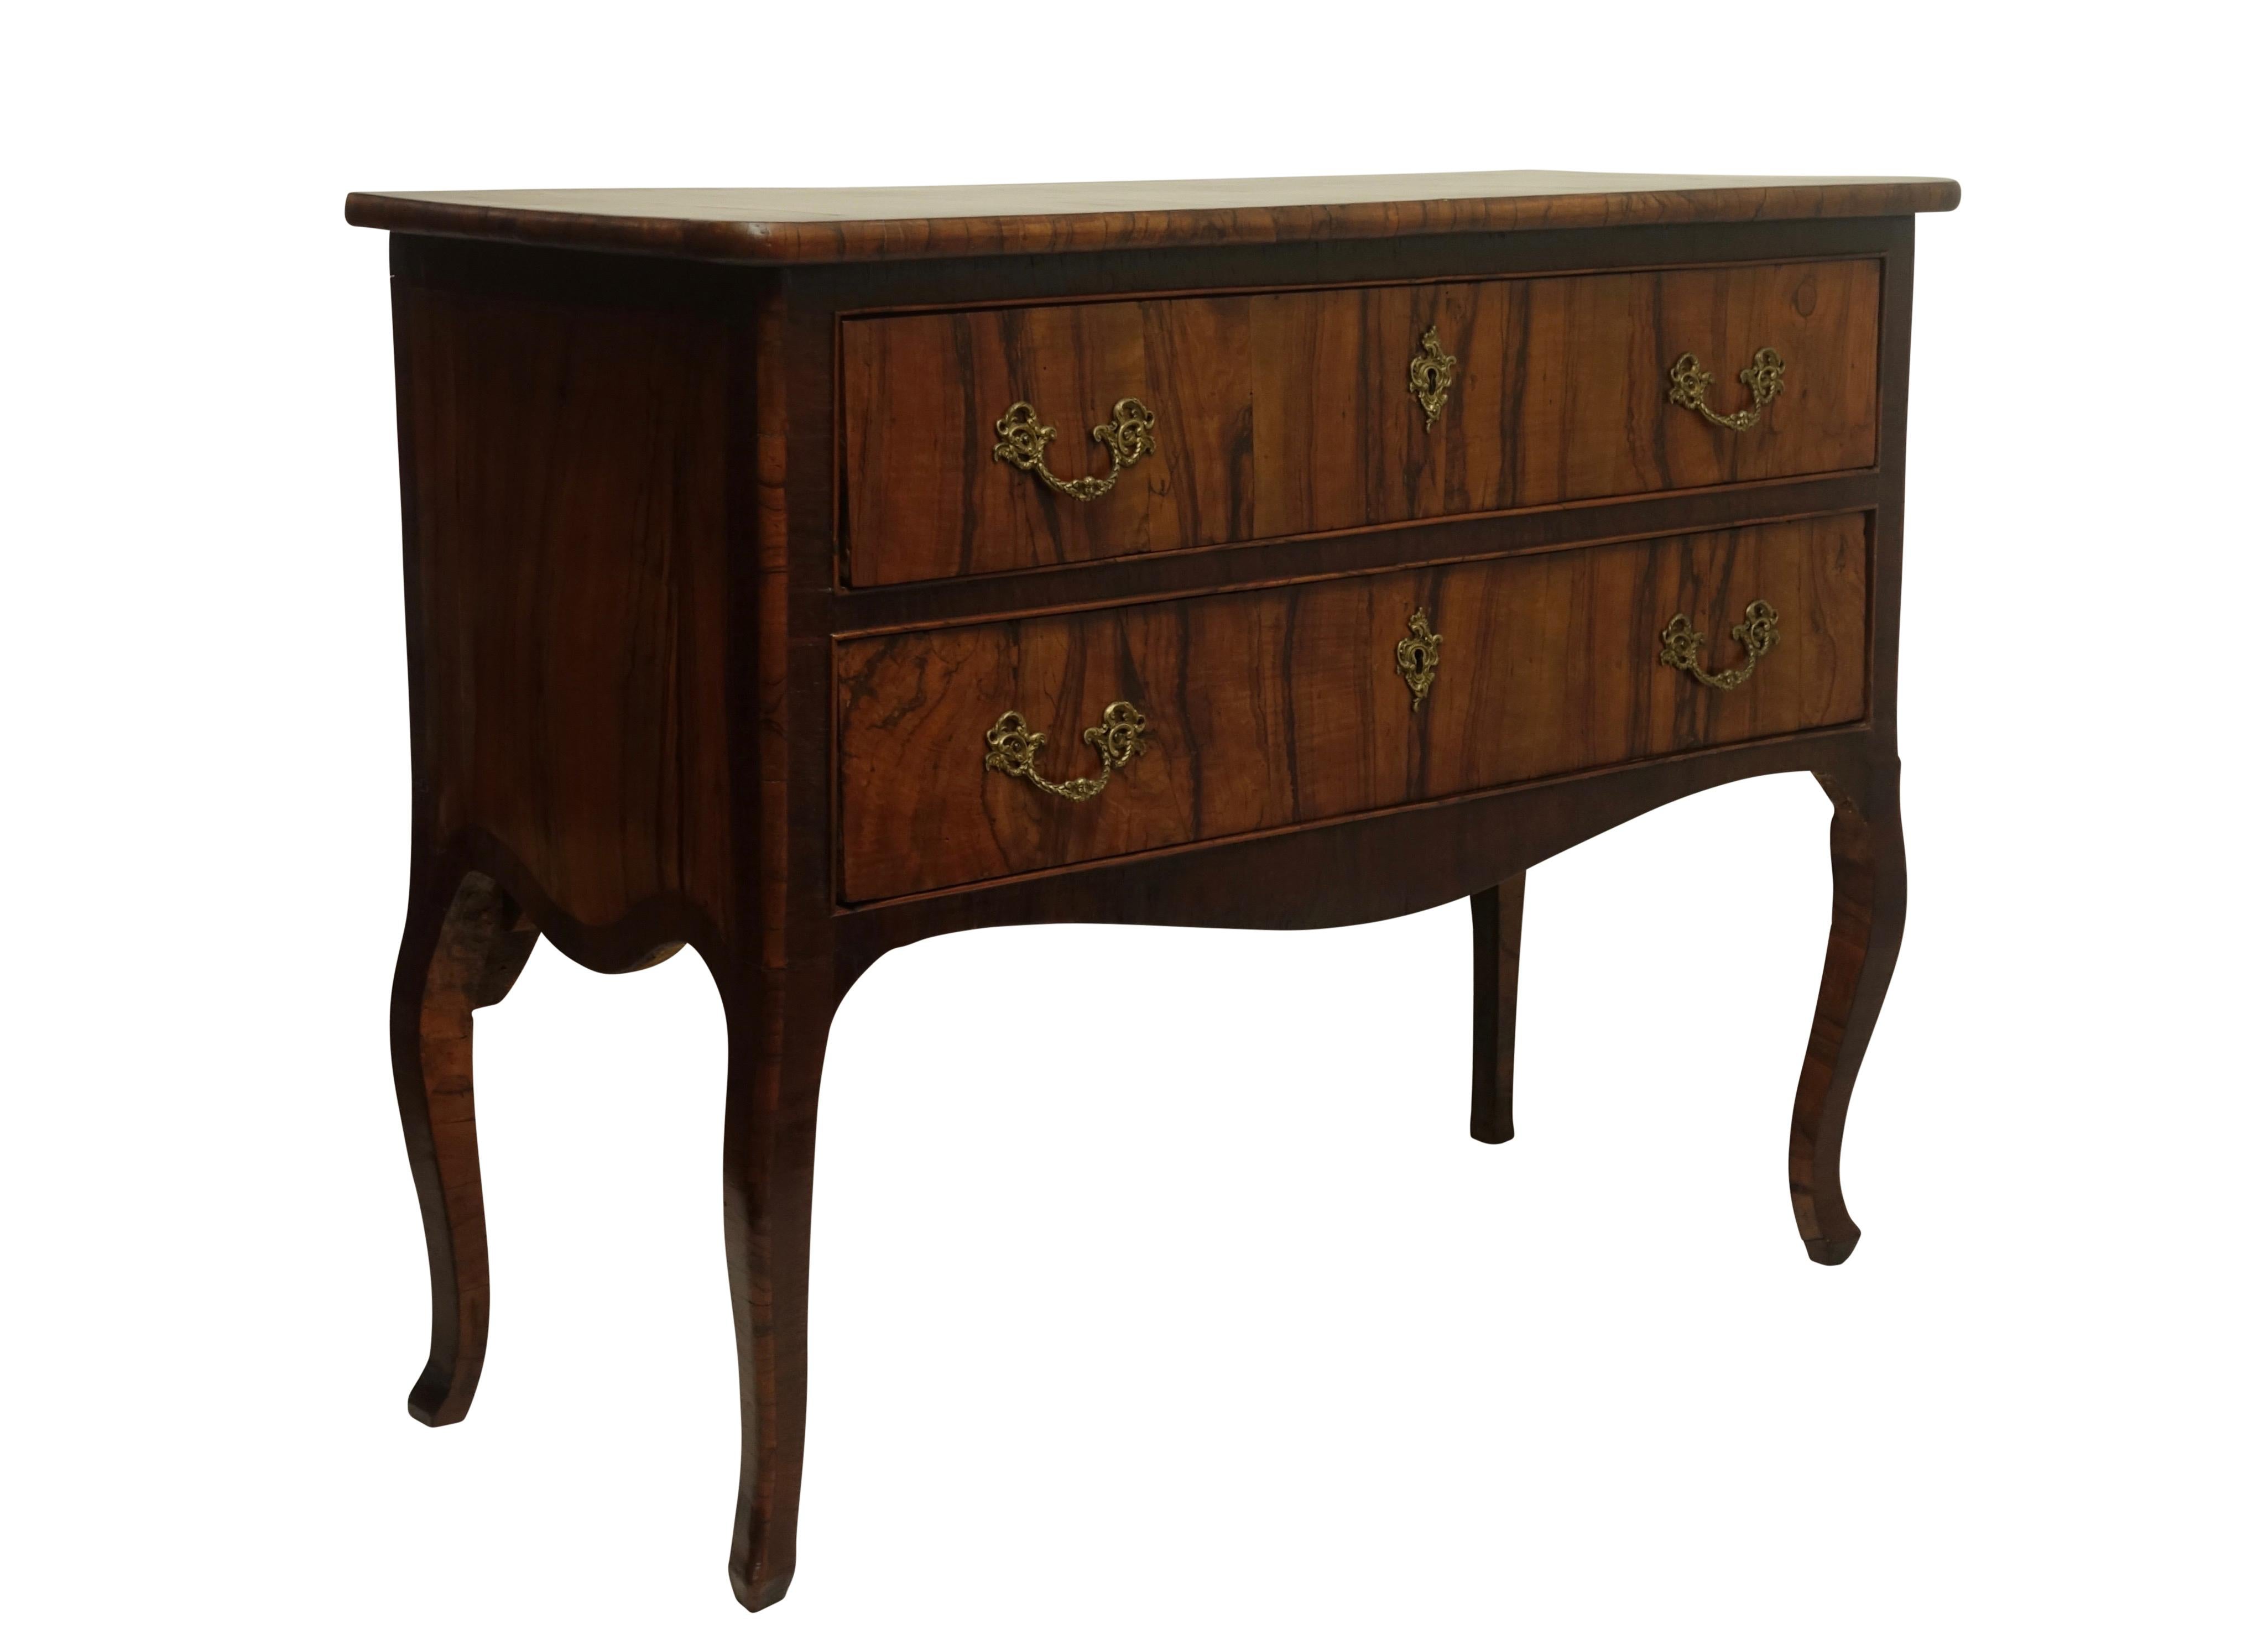 Mahogany two-drawer commode with inset of Circassian walnut on the top and drawer fronts standing on cabriole legs, Portuguese, 18th century.
   